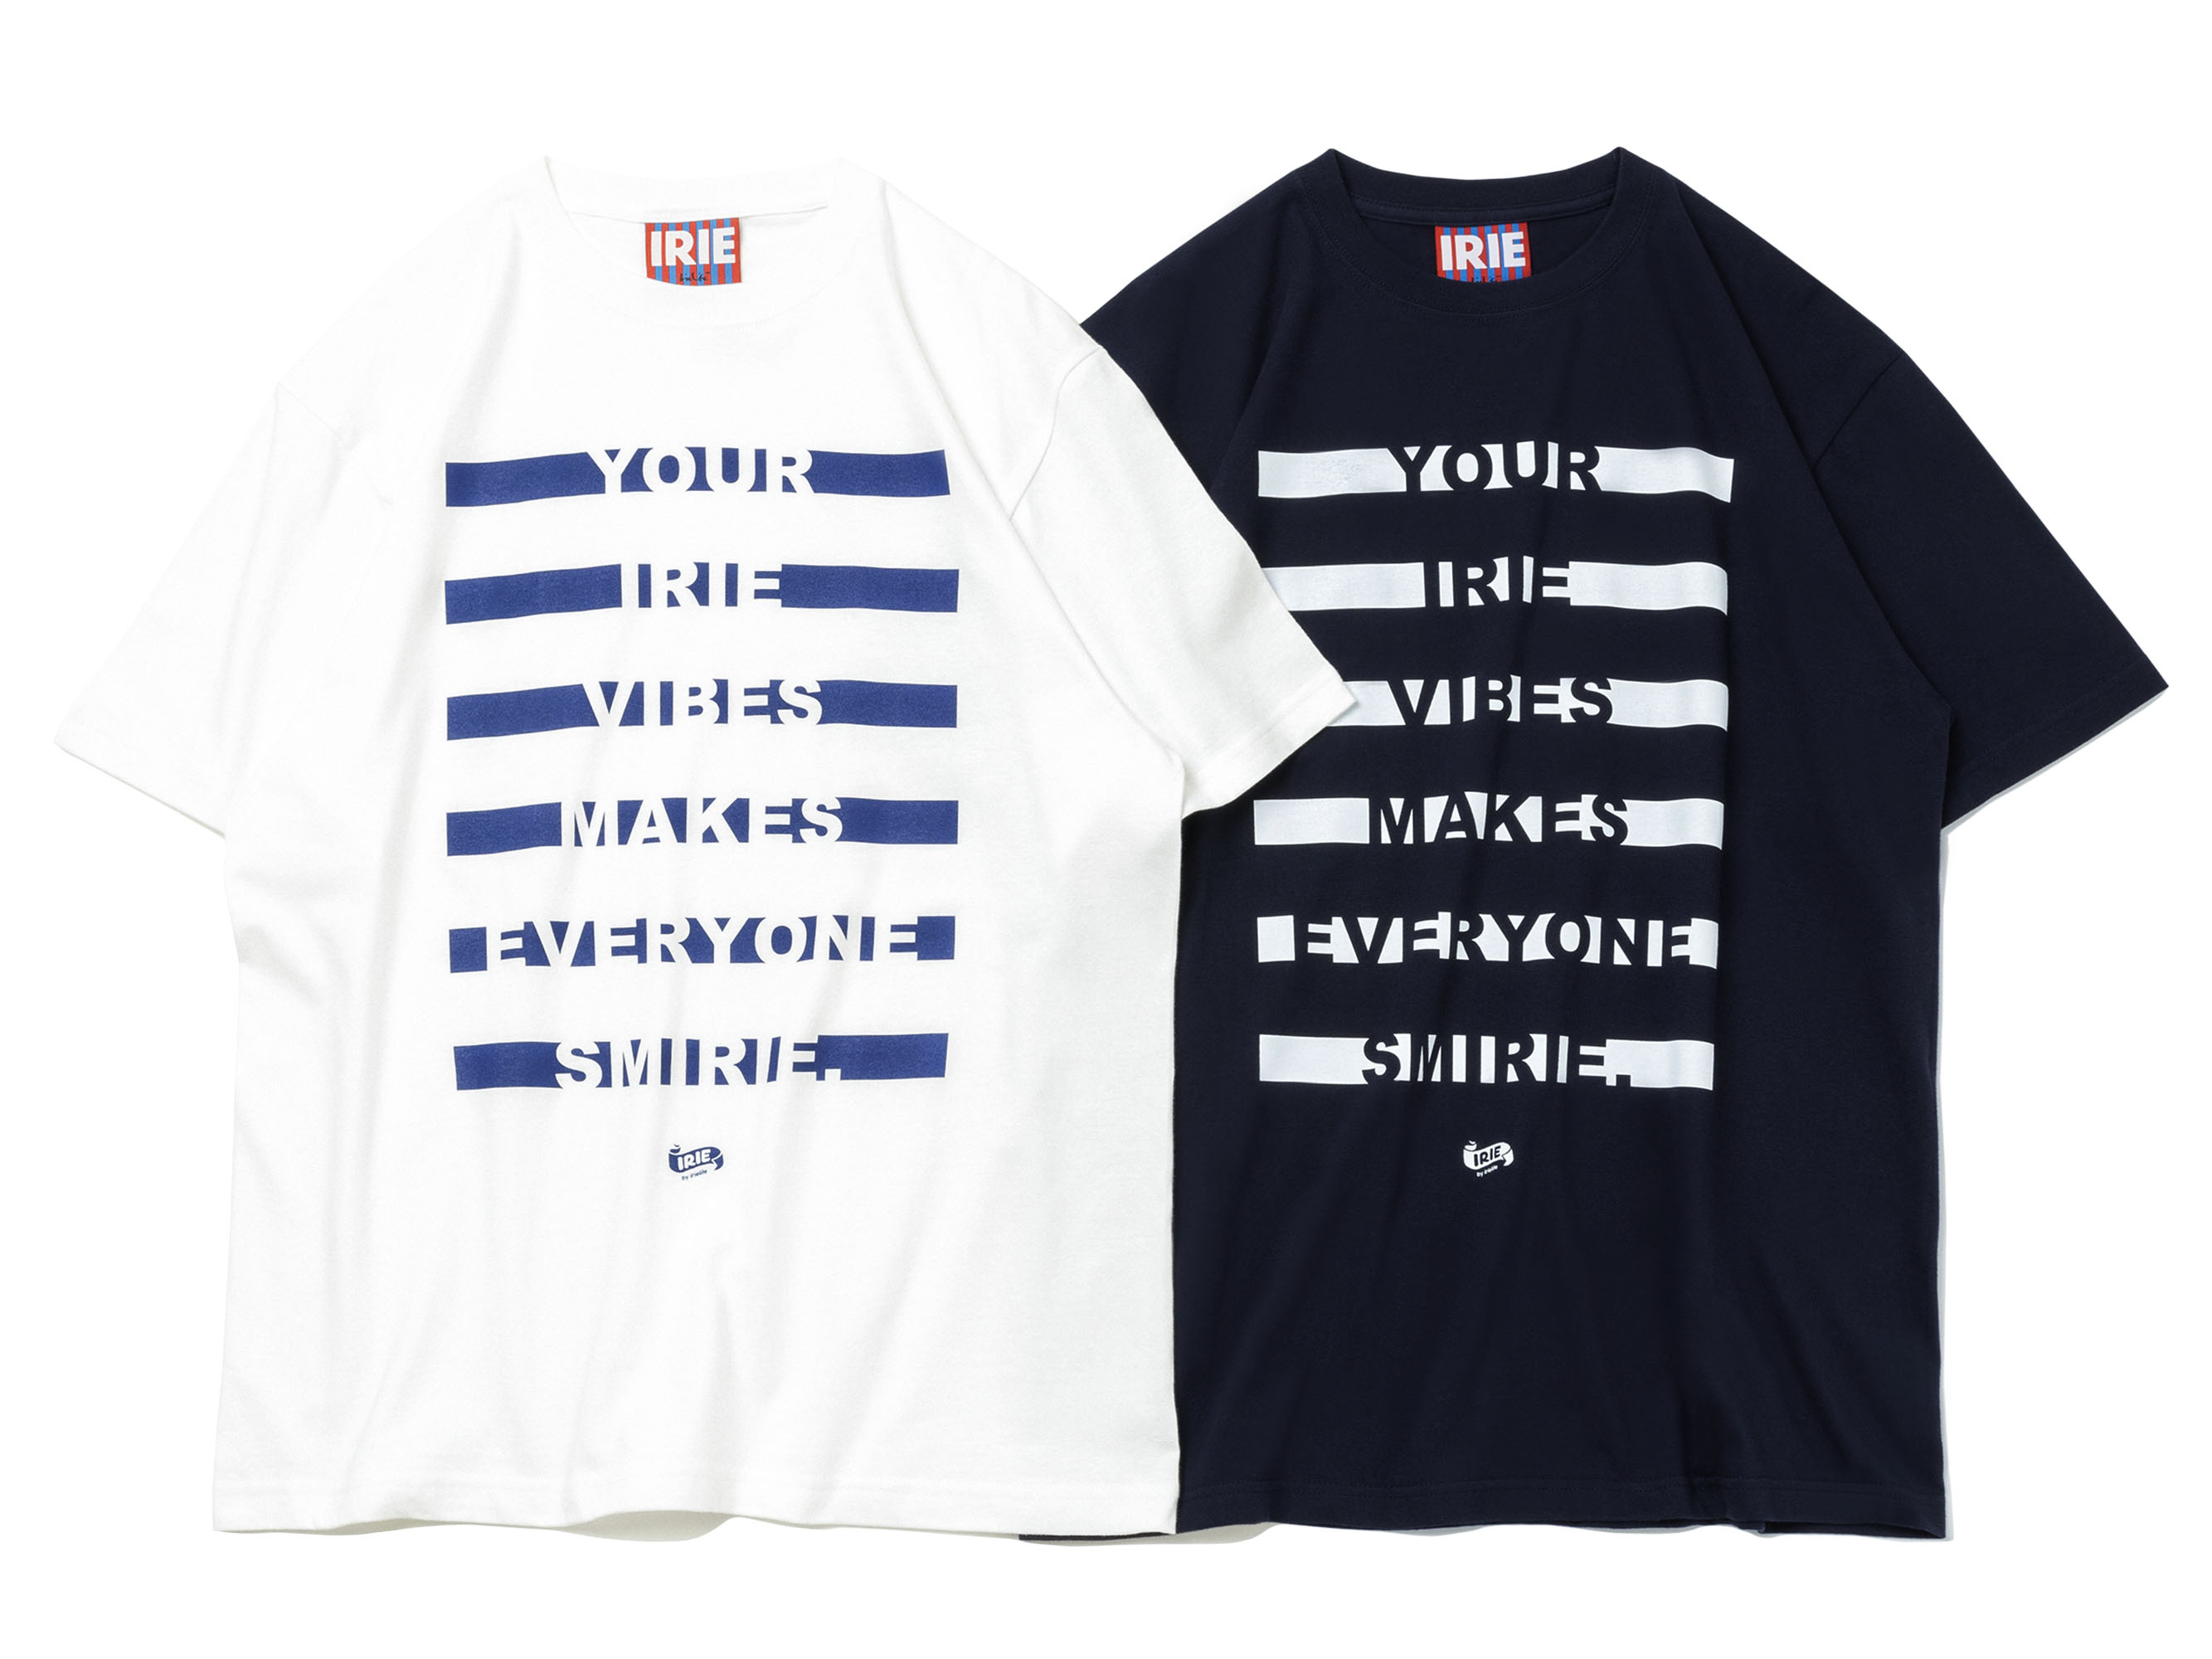 MESSAGE BORDER TEE - IRIE by irielife